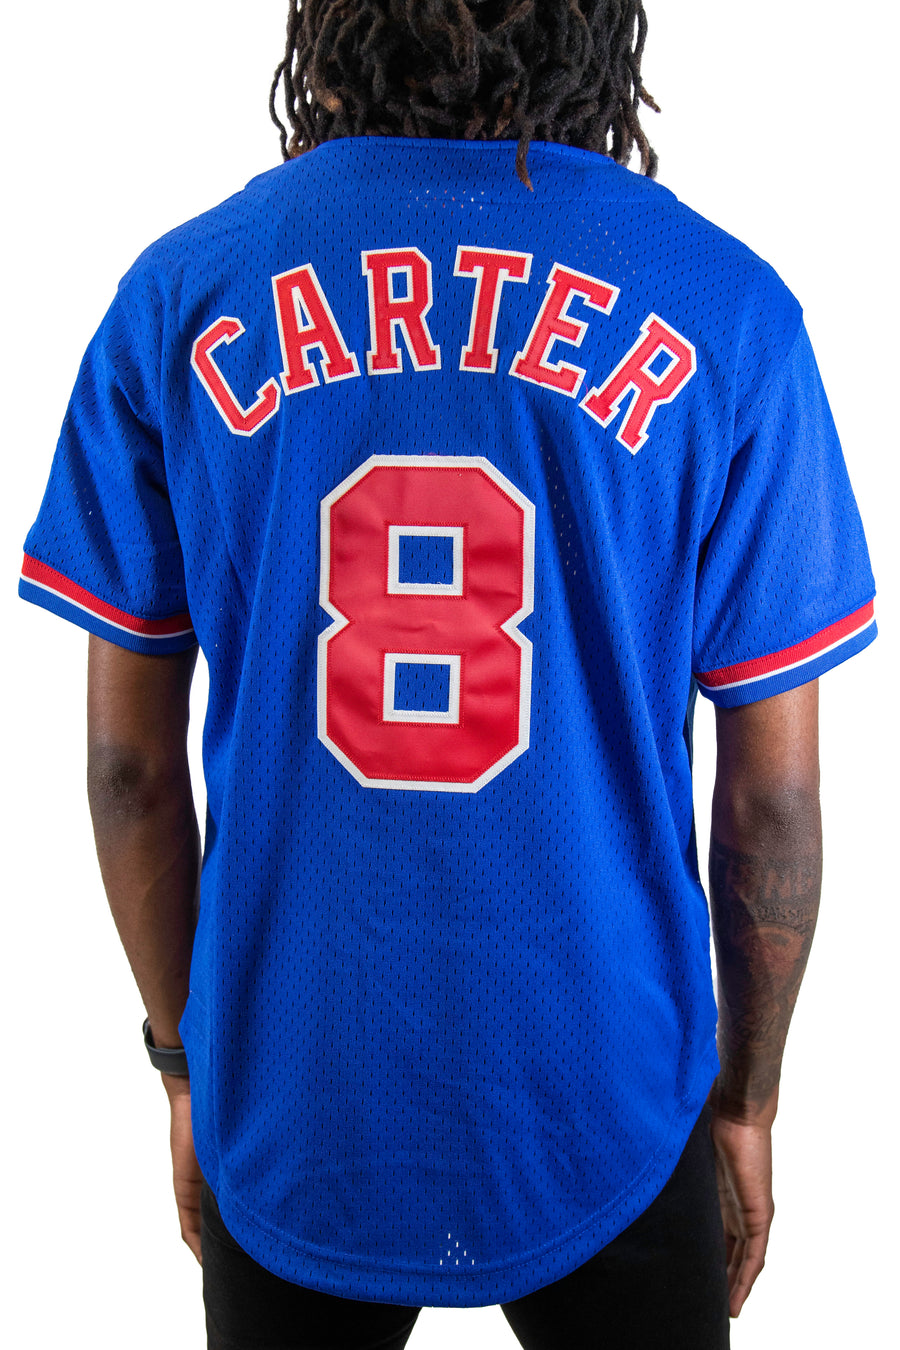 Mitchell & Ness: Cooperstown Jersey Montreal Expos (Gary Carter)